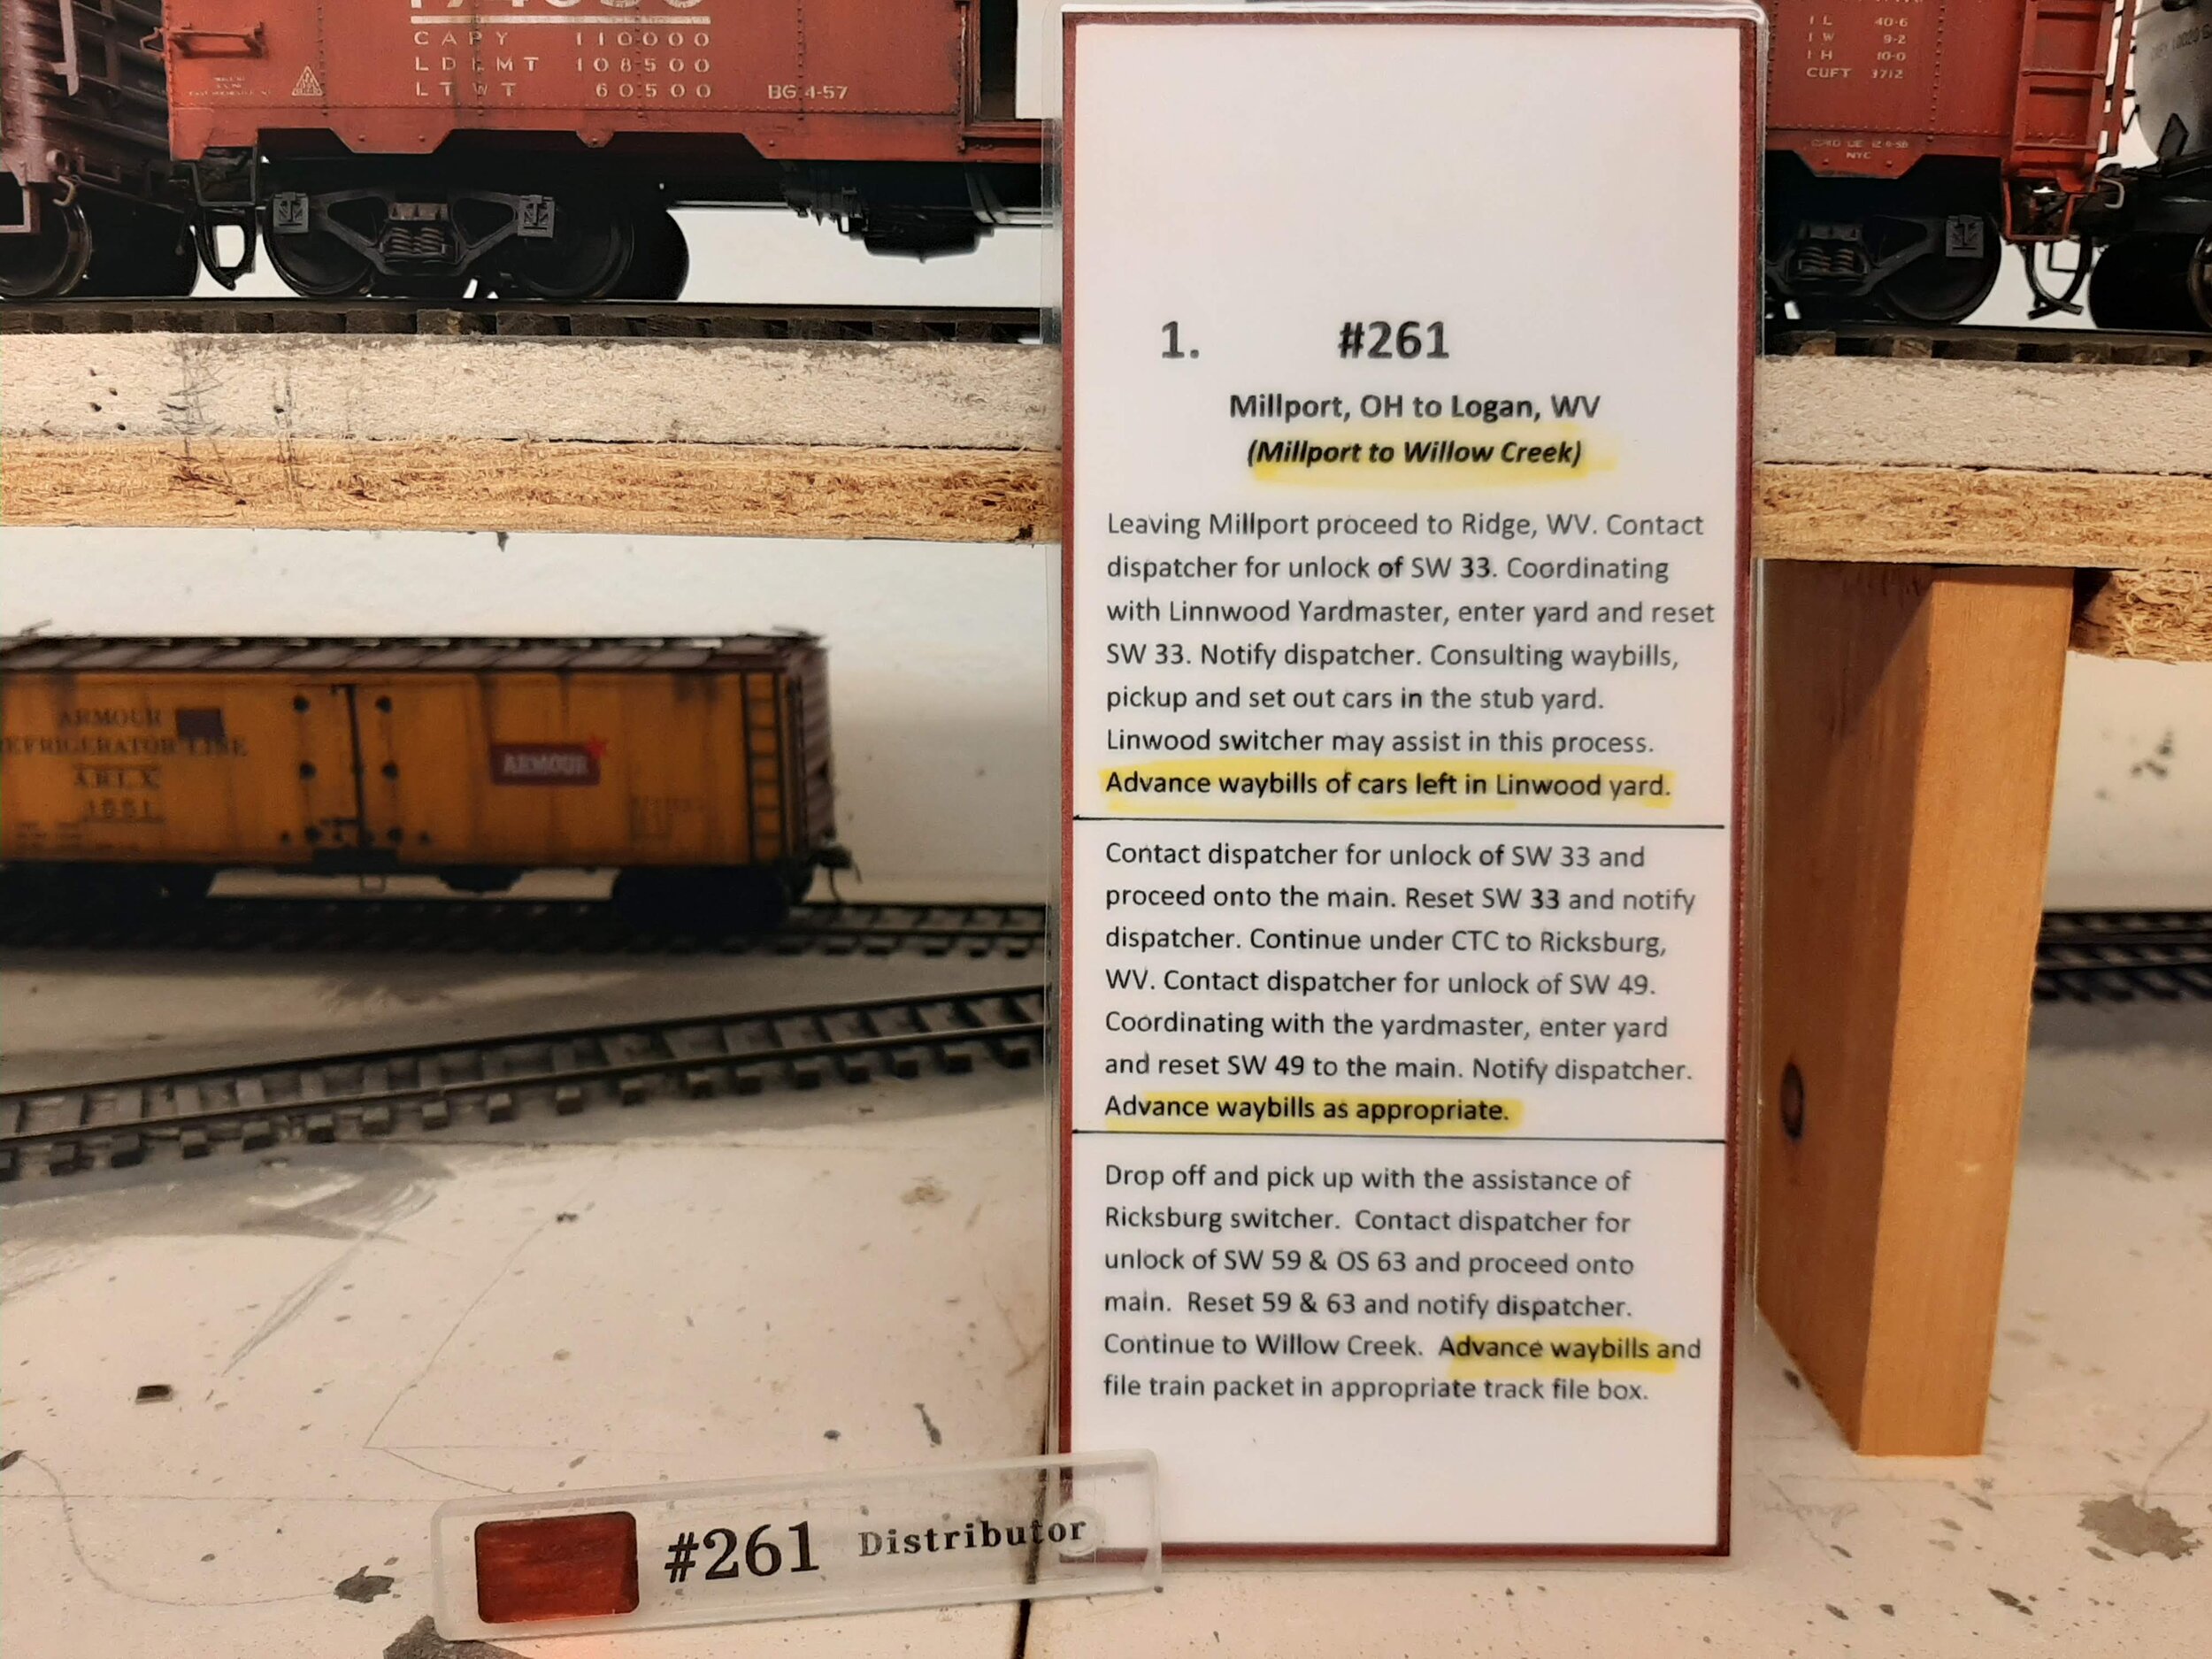  The TDC tells the crew in excruciating detail what to do every step of the way. The A&amp;O entertains many operators, and it can take many visits to be familiar with the operations. Now, to get folks to  read.  